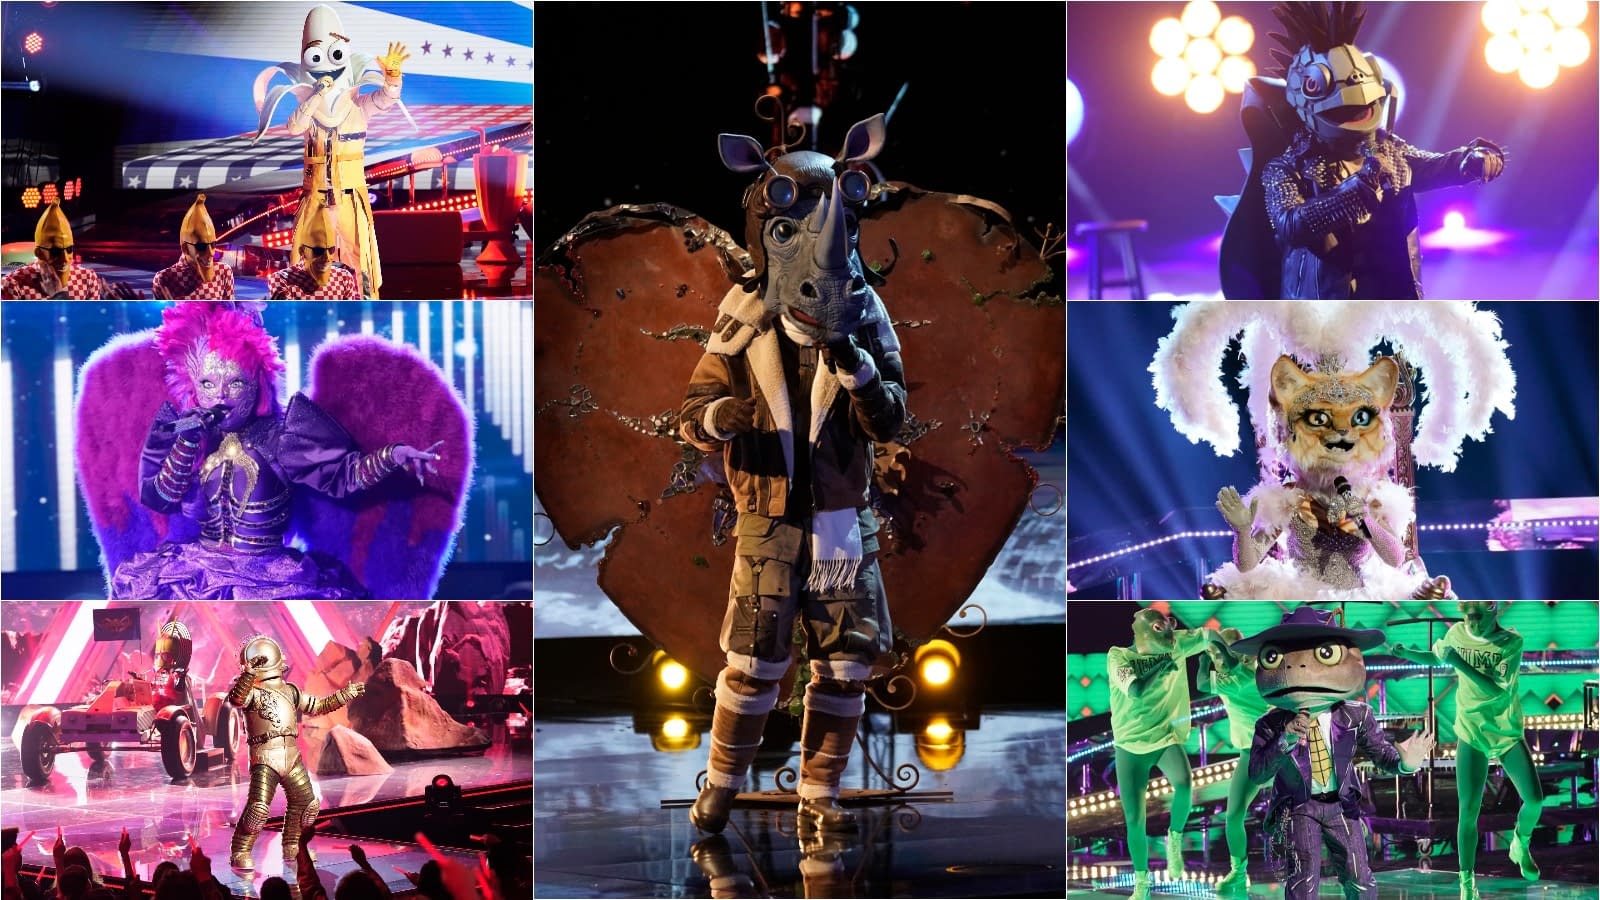 The Masked Singer Season 3 Sing Along Turns Tables On Viewers